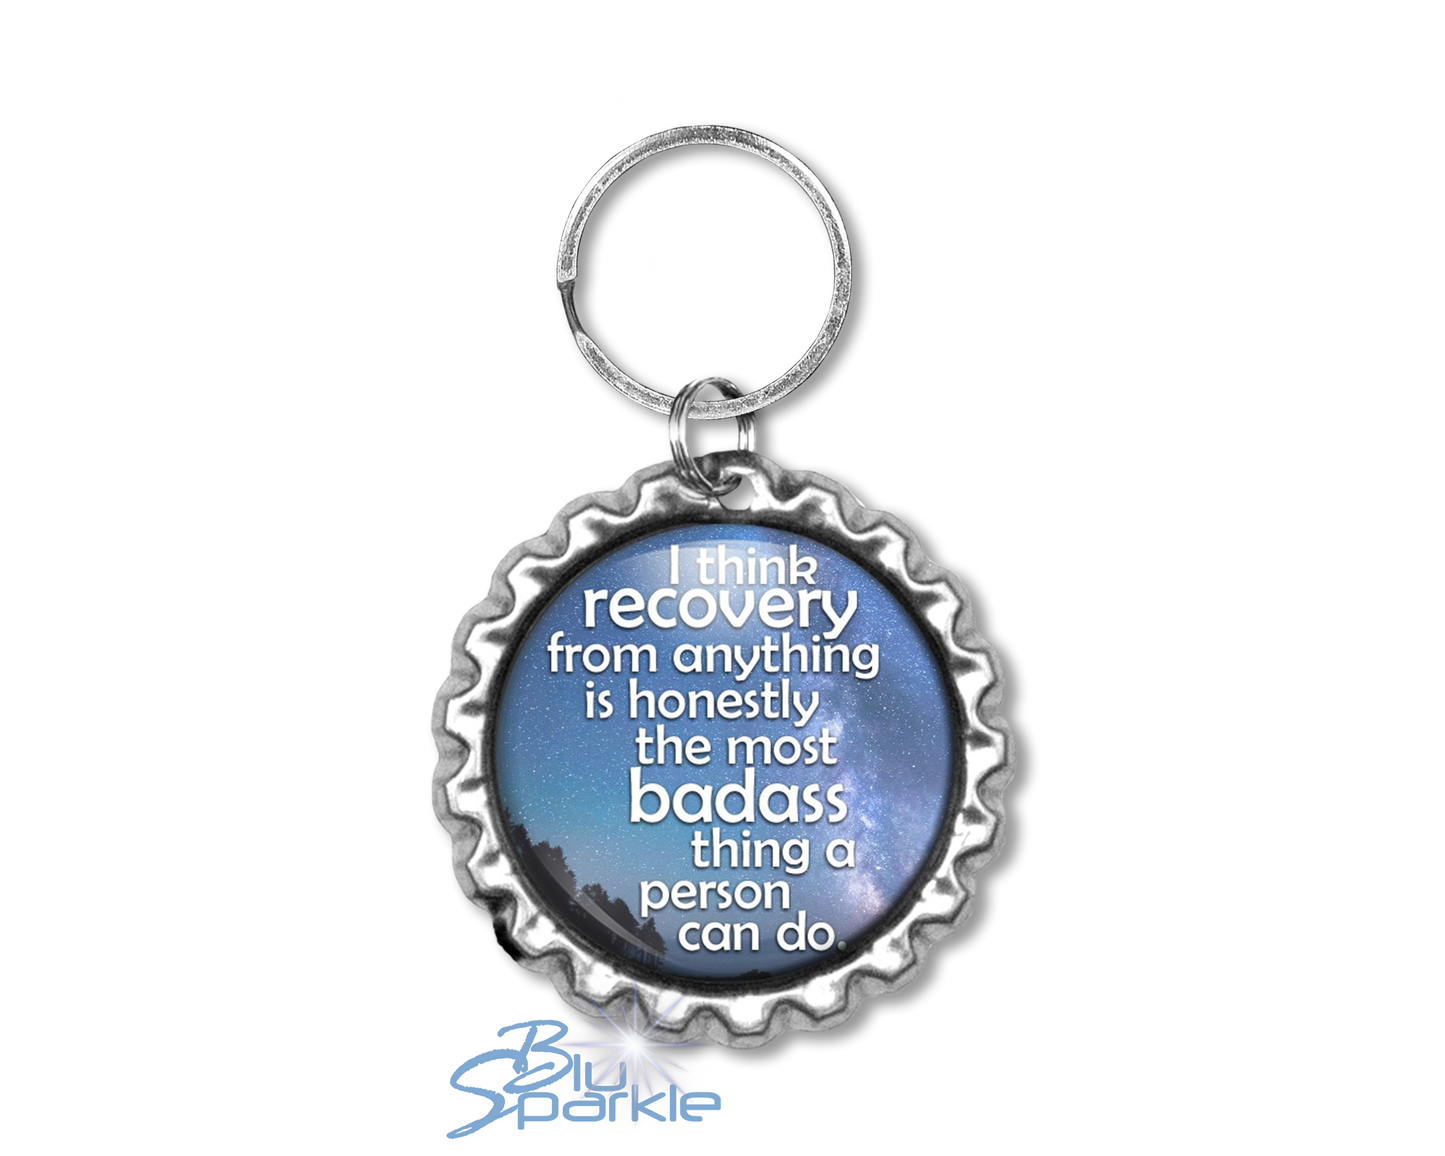 I Think Recovery From Anything Is Honestly The Most Badass Thing A Person Can Do - Key Chains